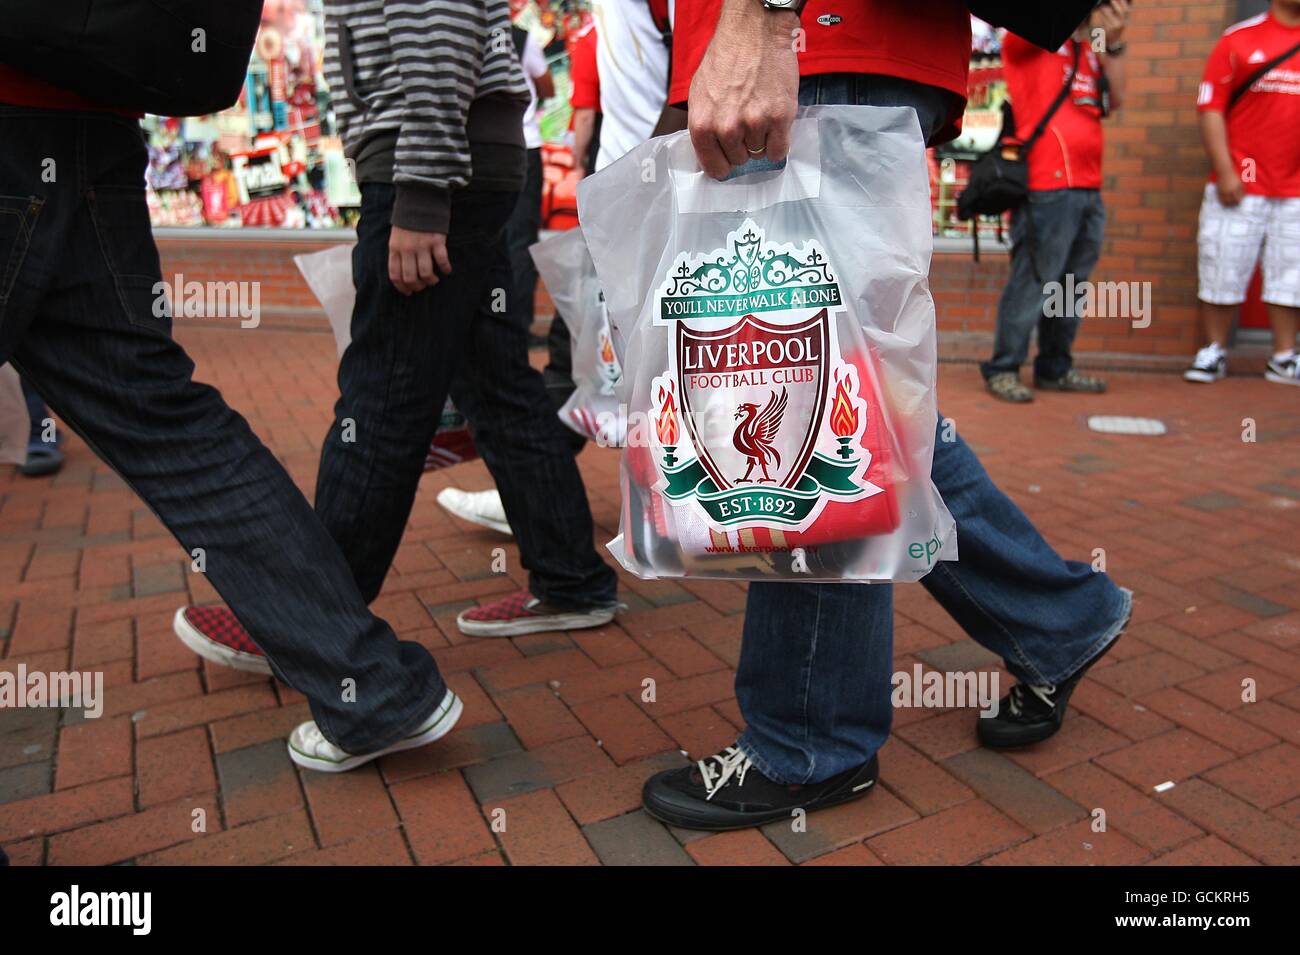 A Liverpool fan carries a bag after visiting the Liverpool FC Club Shop Stock Photo